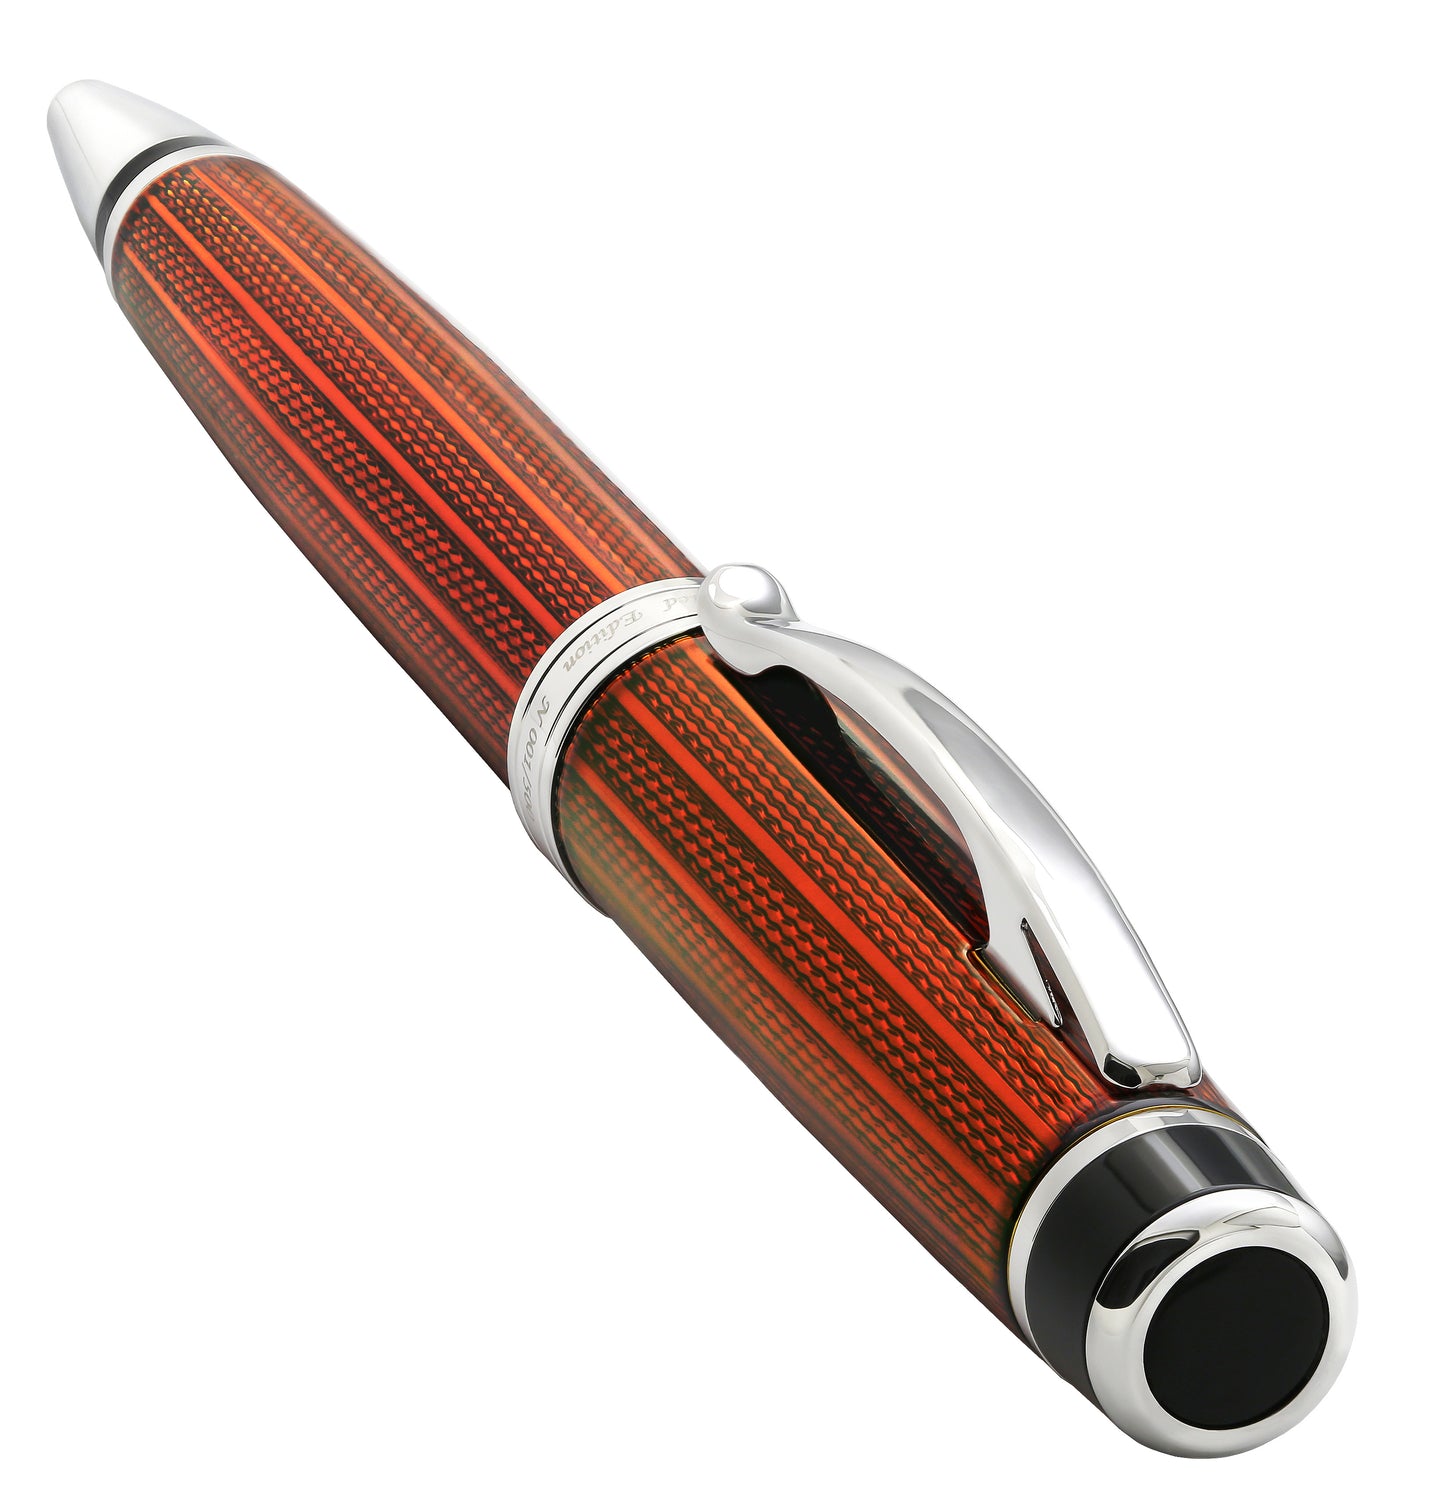 Xezo - Angled 3D view of the back of the Incognito Sunstone B ballpoint pen